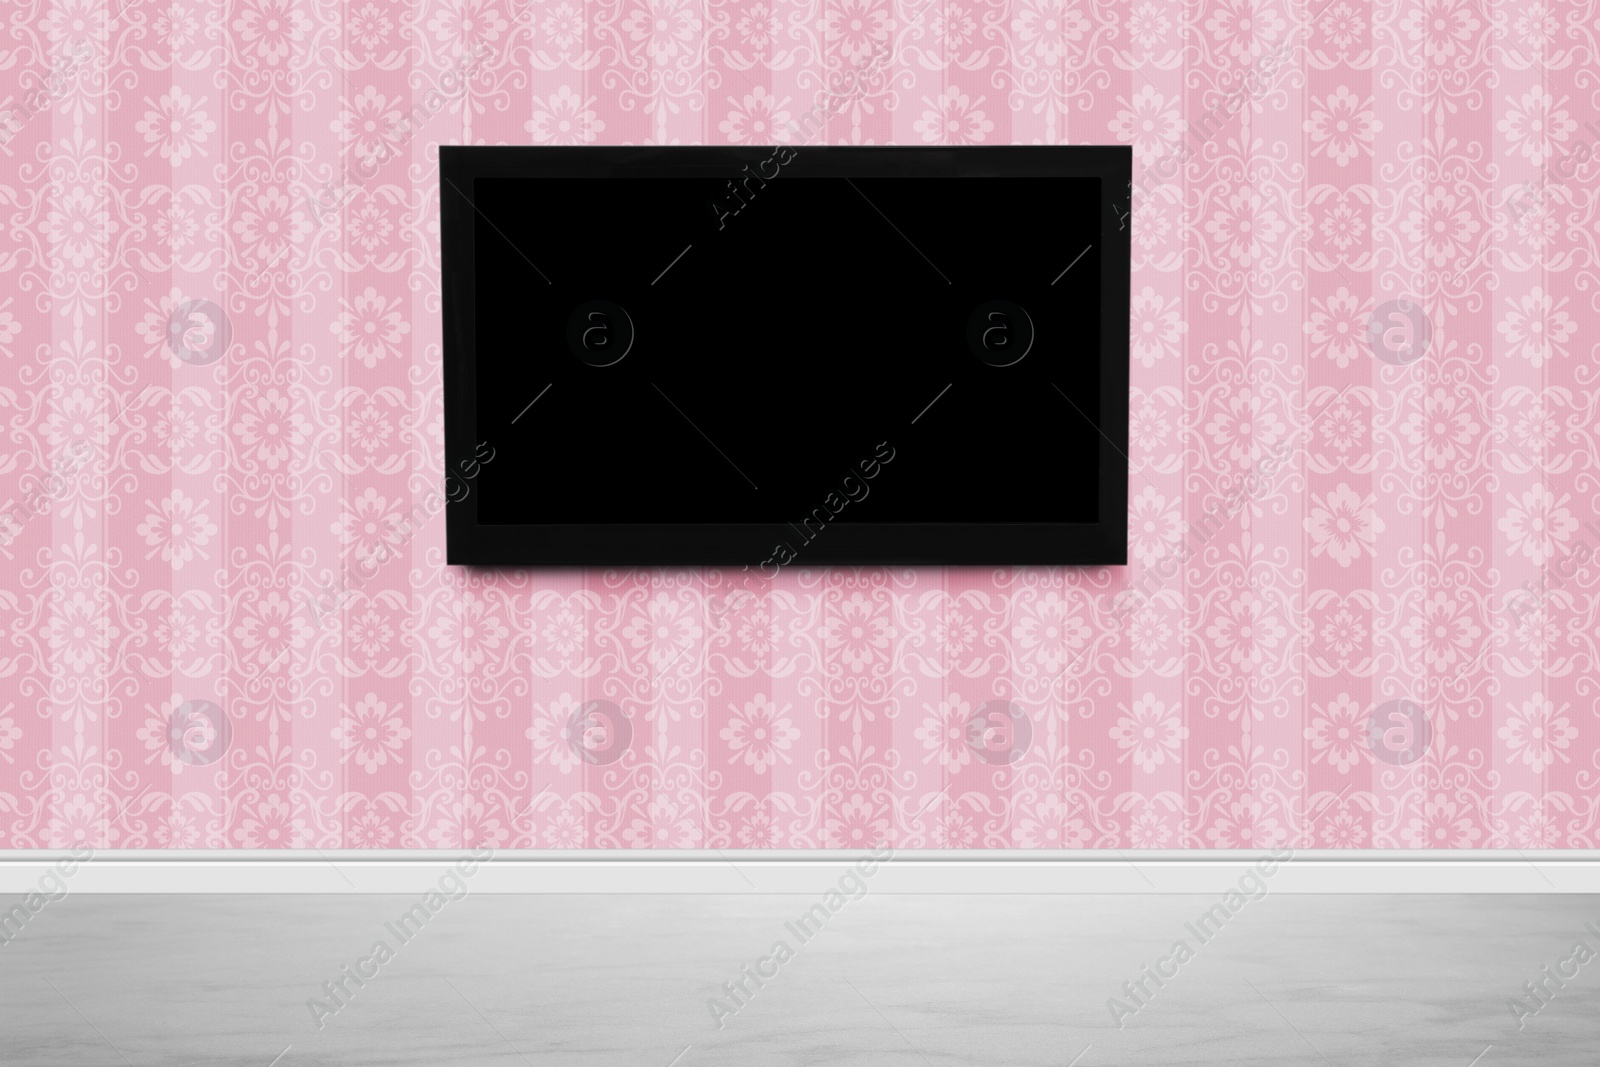 Image of Modern TV on pink wall in room. Space for design